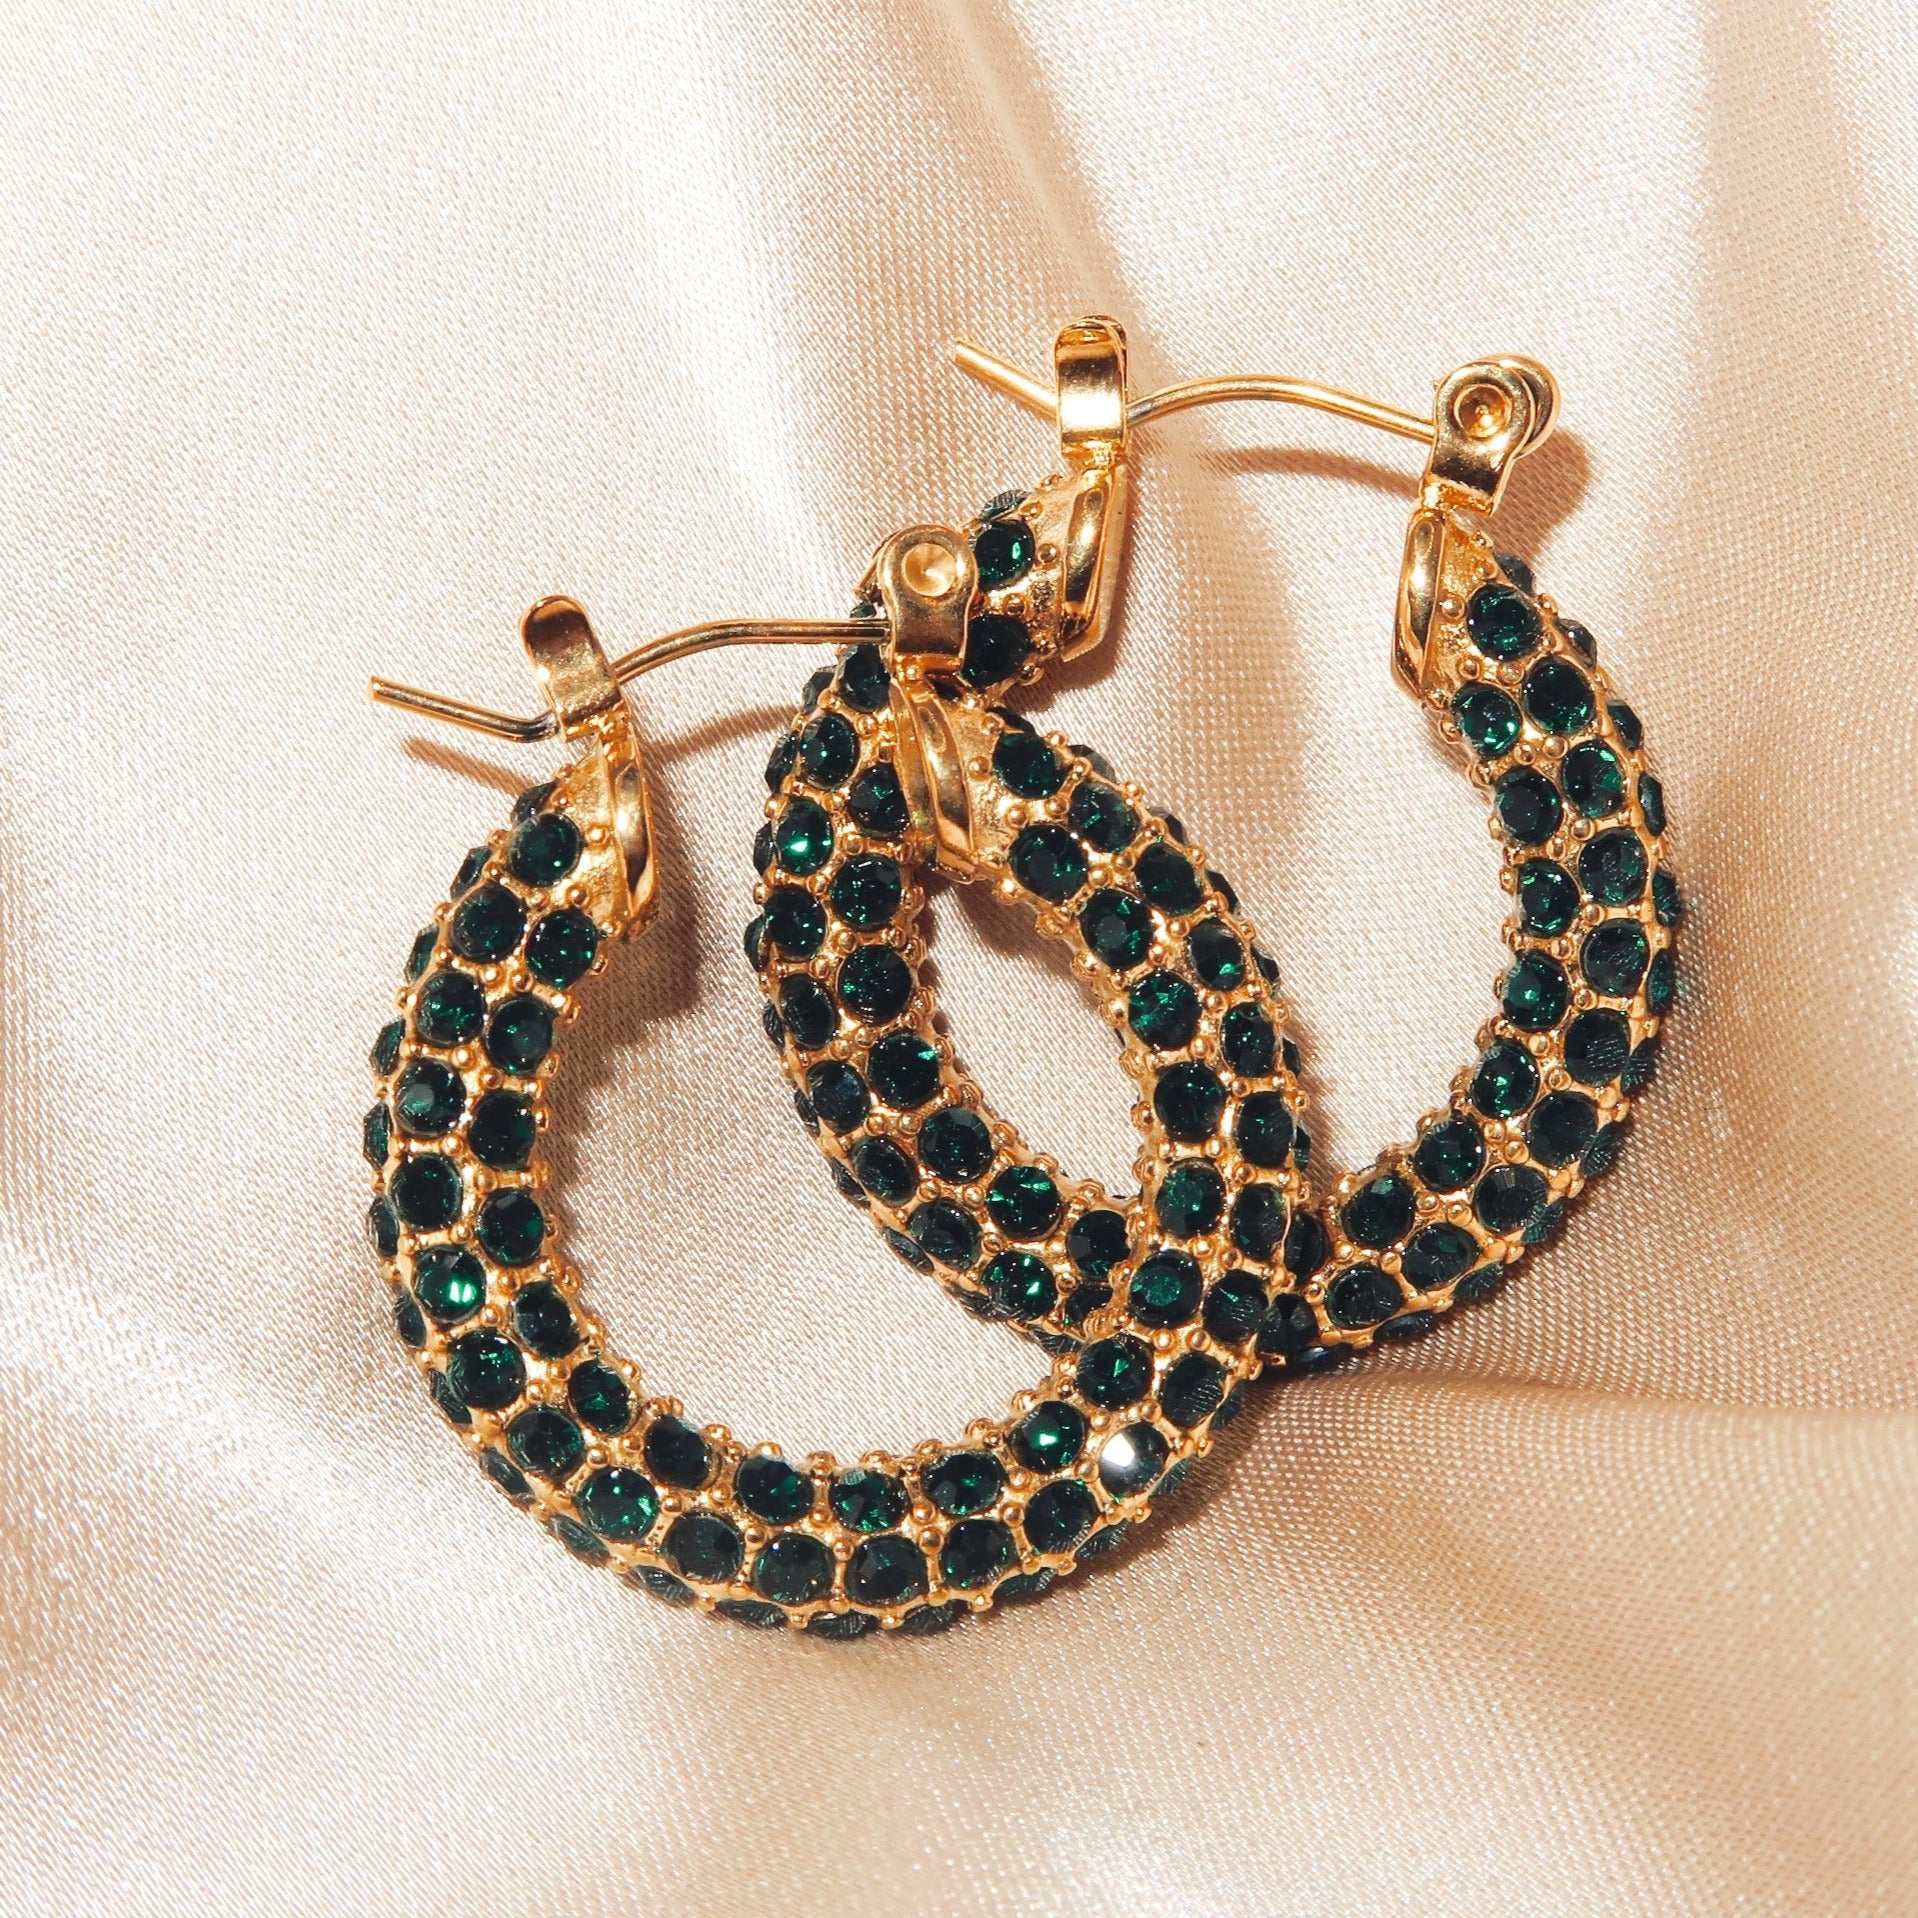 STELLA - 18K PVD Gold Plated CZ Stones Hoop Earrings - Mixed Metals